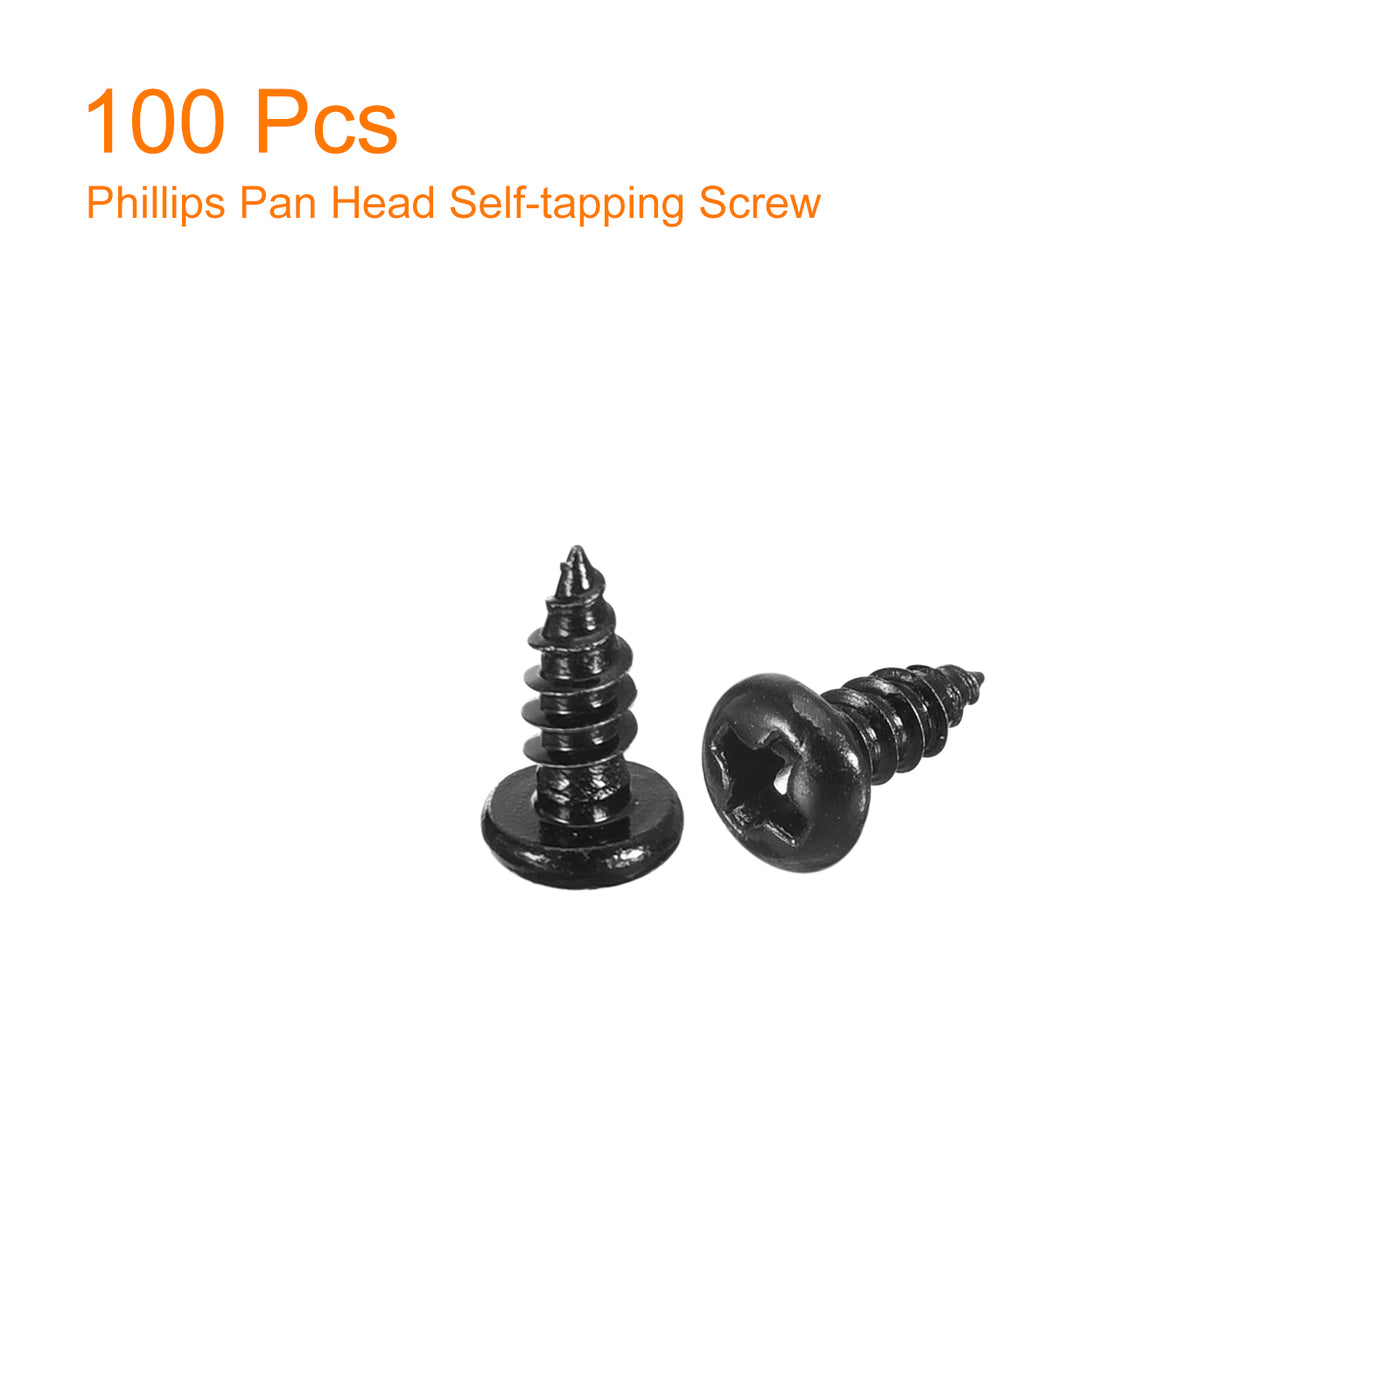 uxcell Uxcell 3mm x 8mm Phillips Pan Head Self-tapping Screw, 100pcs - 304 Stainless Steel Round Head Wood Screw Full Thread (Black)